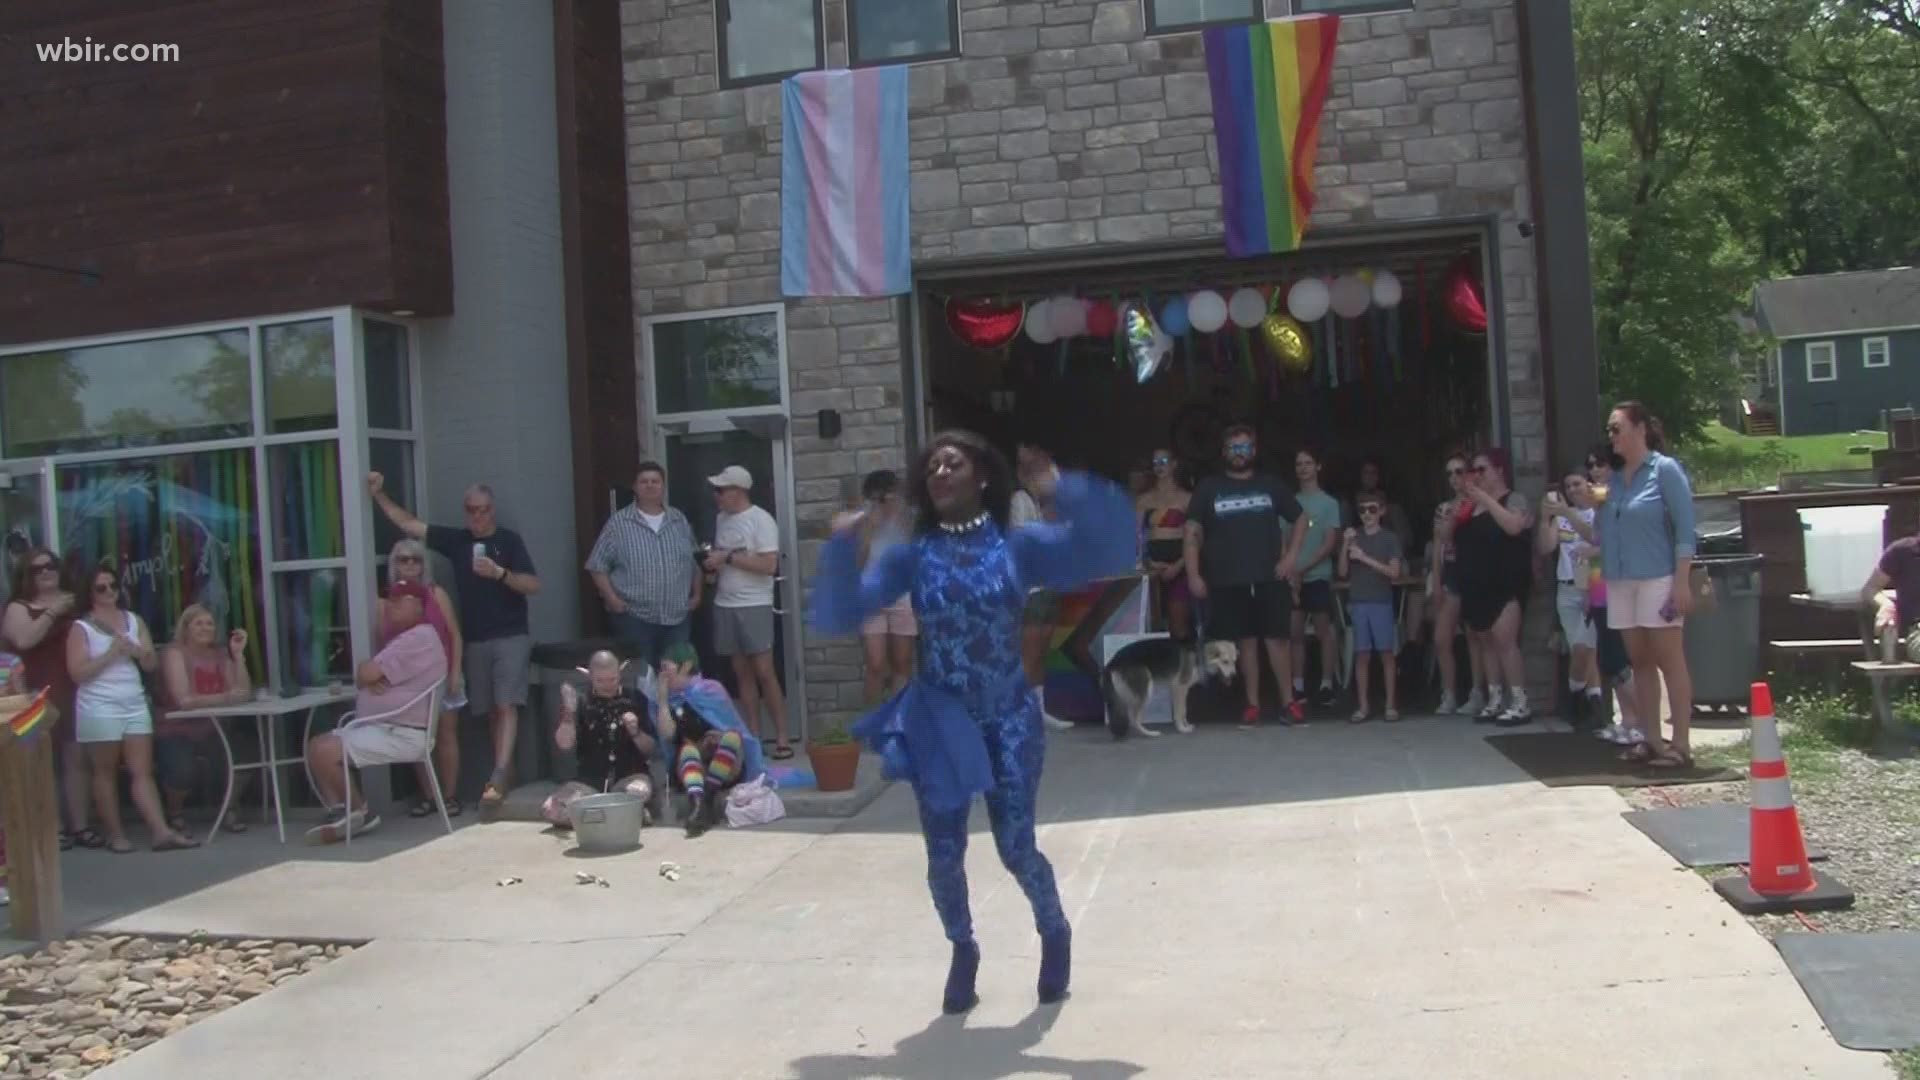 June is Pride Month, and so folks gathered on Sevier Avenue for the first-ever South Side Pride event.